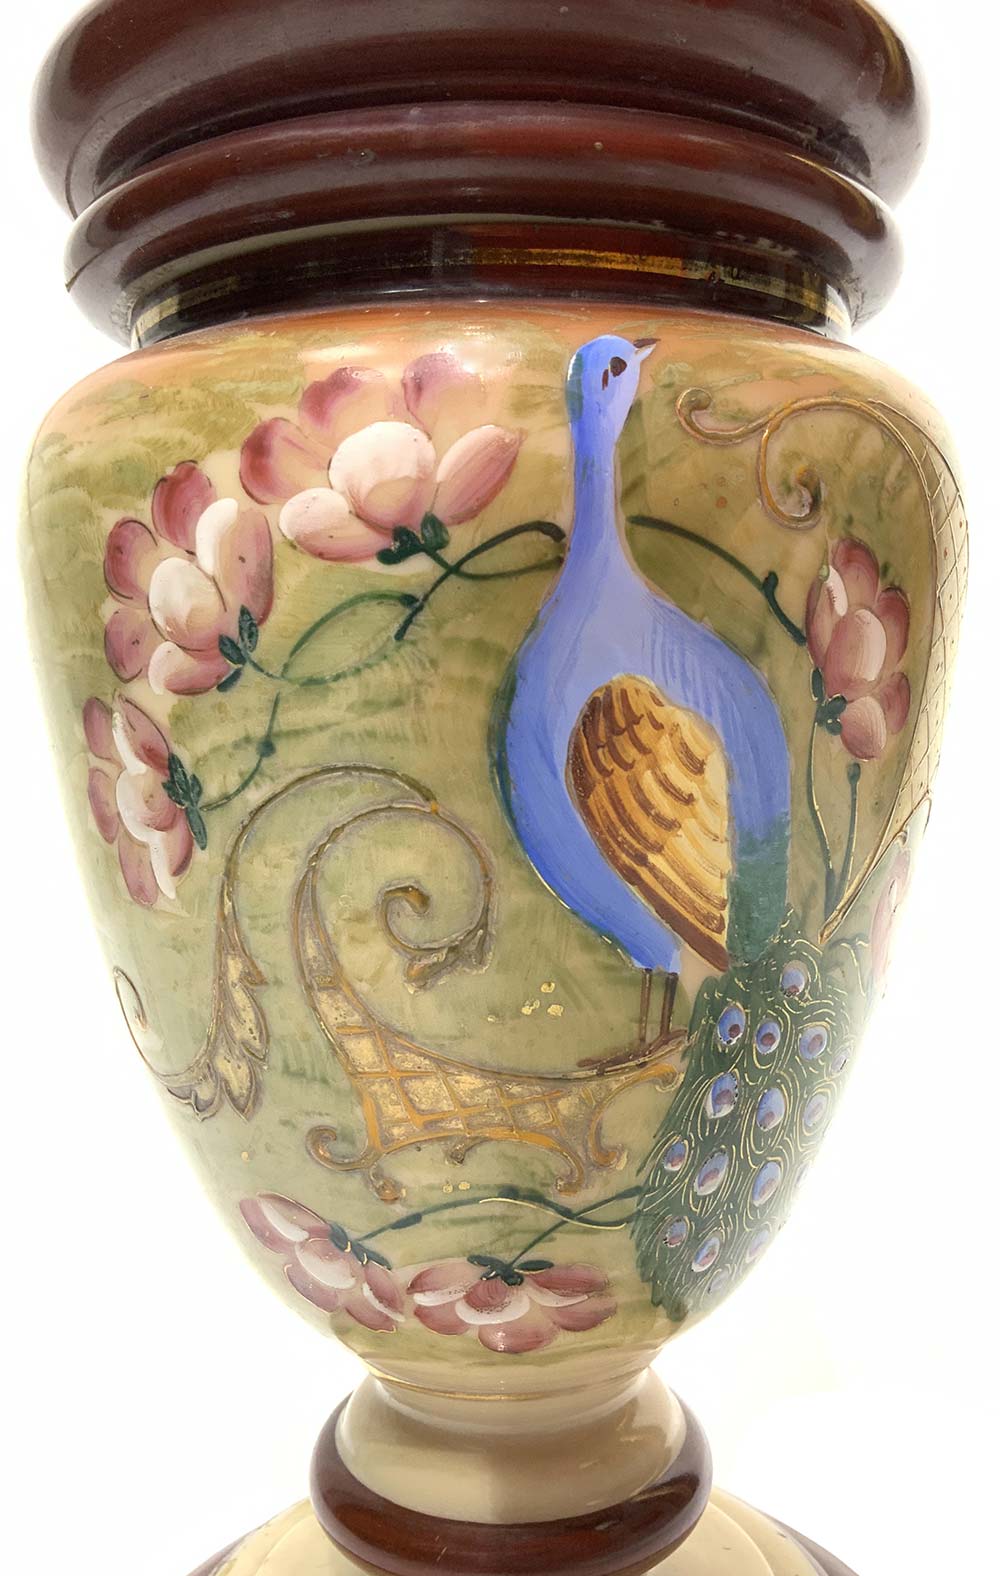 Oil lamp with peacocks decorations and floral carvings glass cup, XX century. H 56 cm. - Image 4 of 6